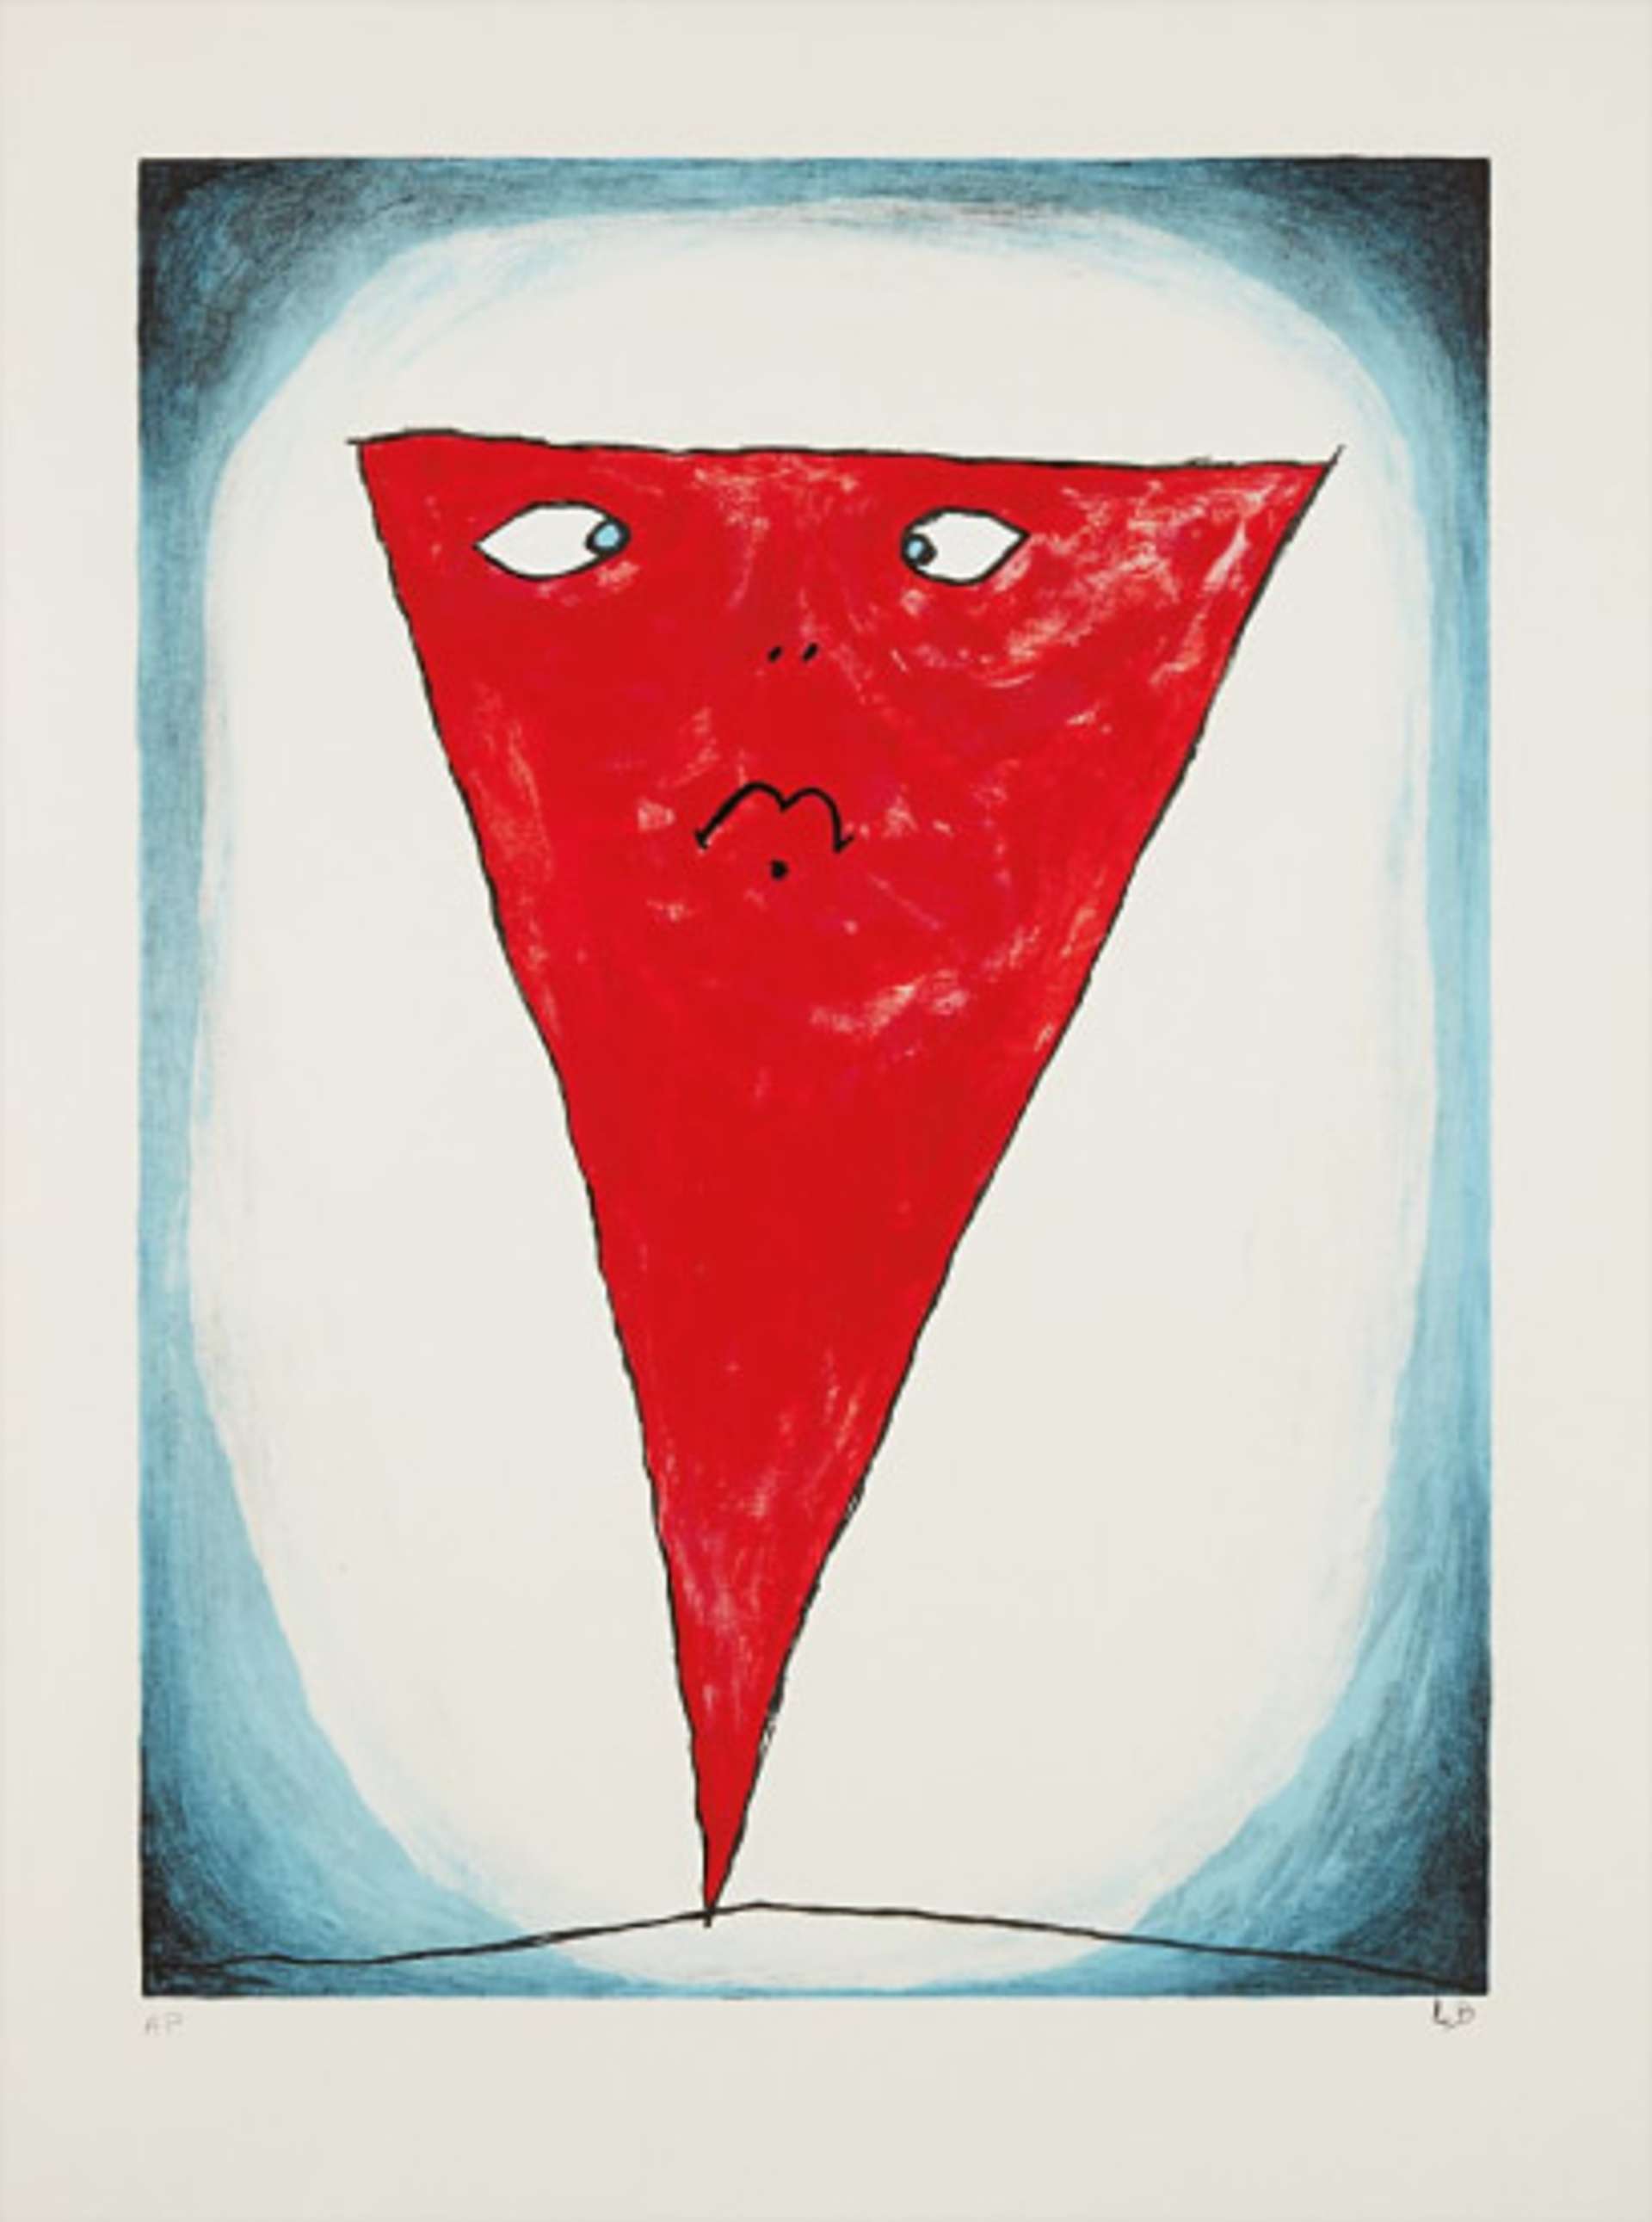 The Guilty Girl is Fragile by Louise Bourgeois. The print features an upside down, red triangle with a sad face.